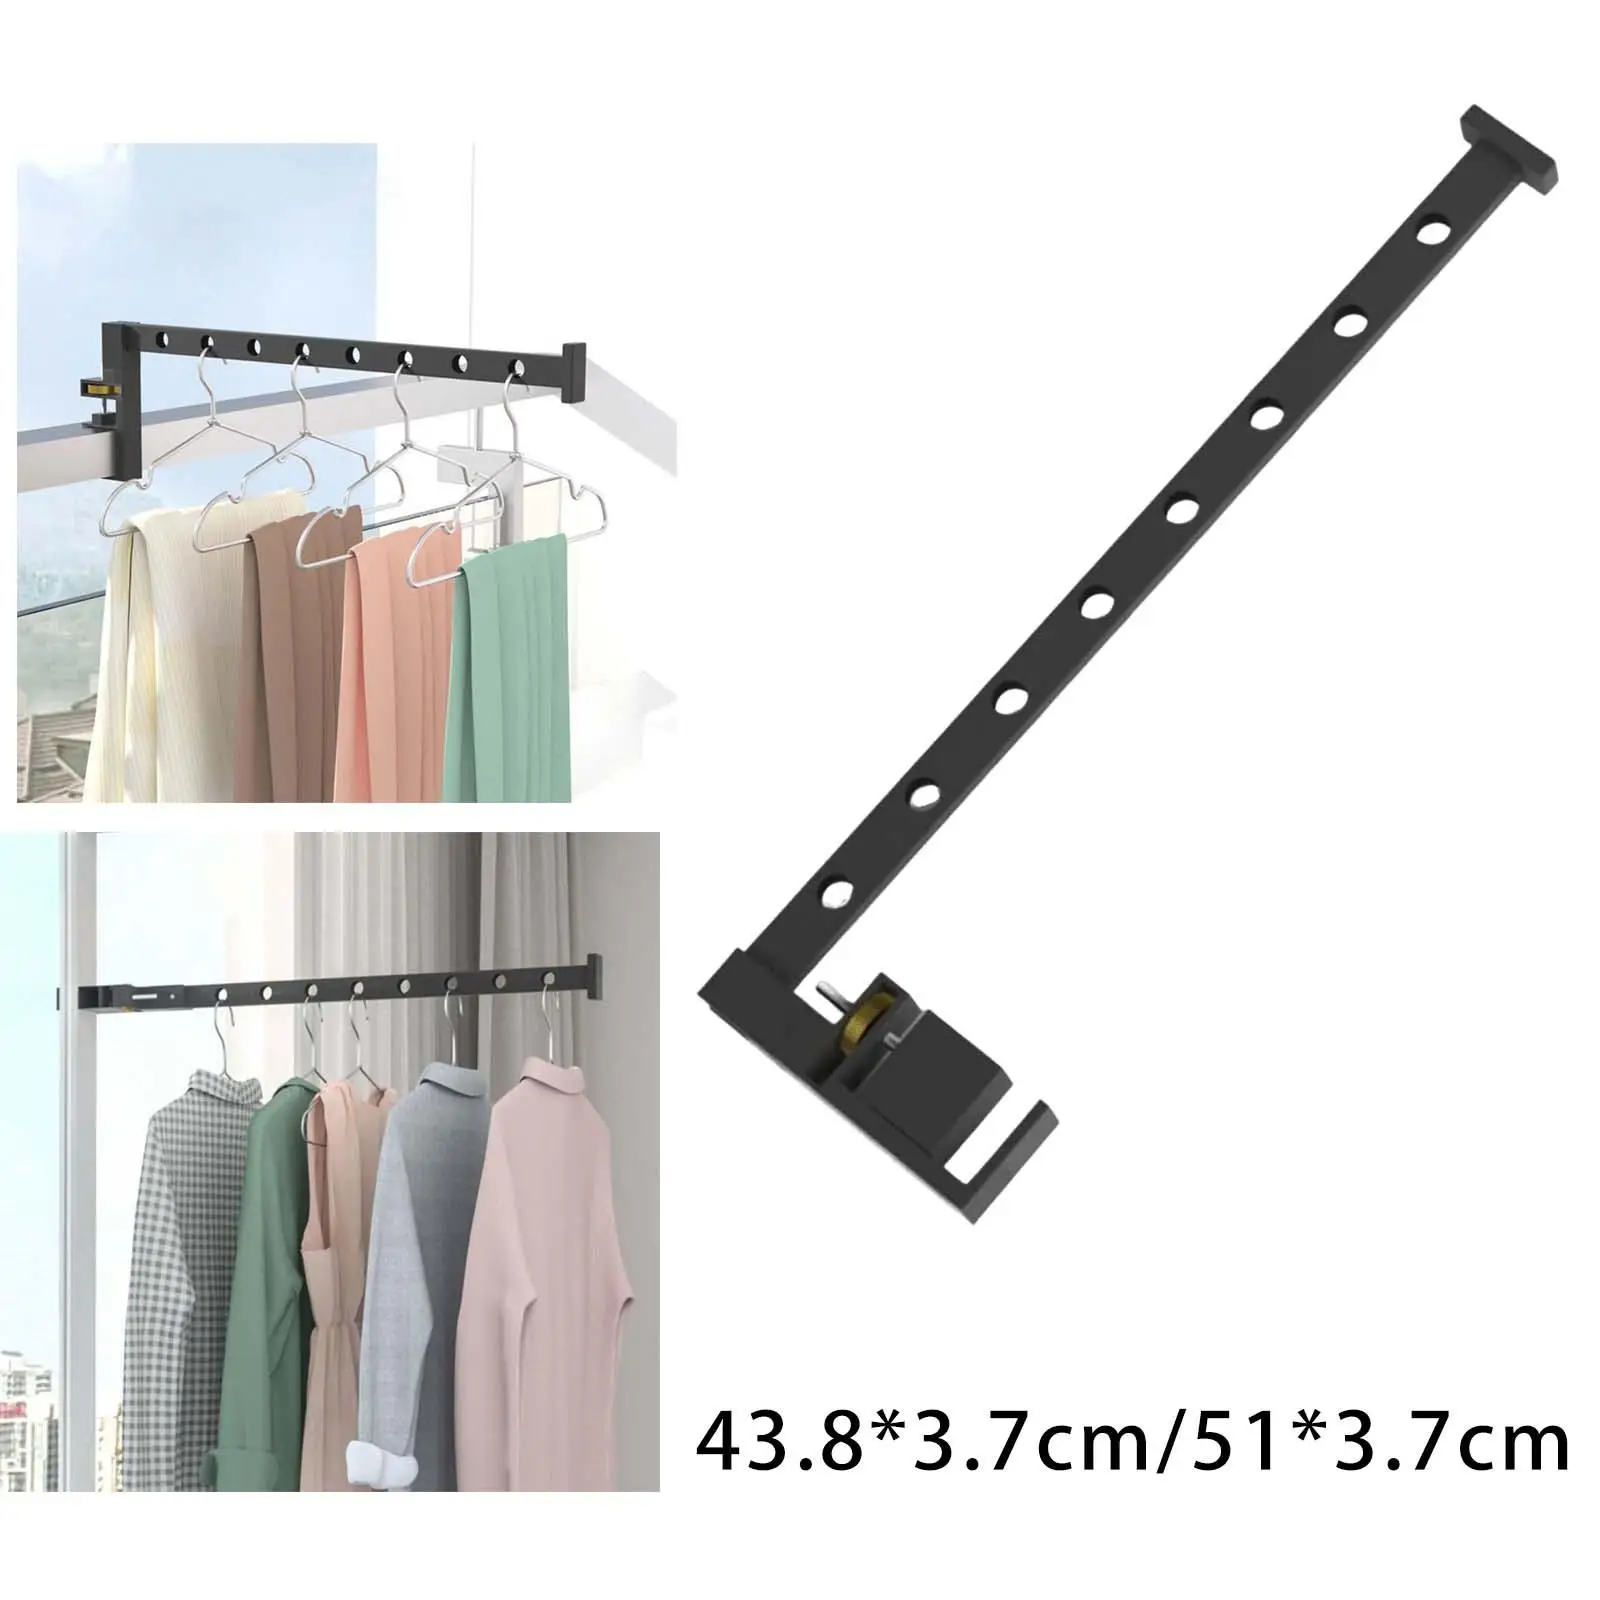 Folding Clothes Hanger Large Space Hooks for Window Wall Bathroom Trousers Shirts